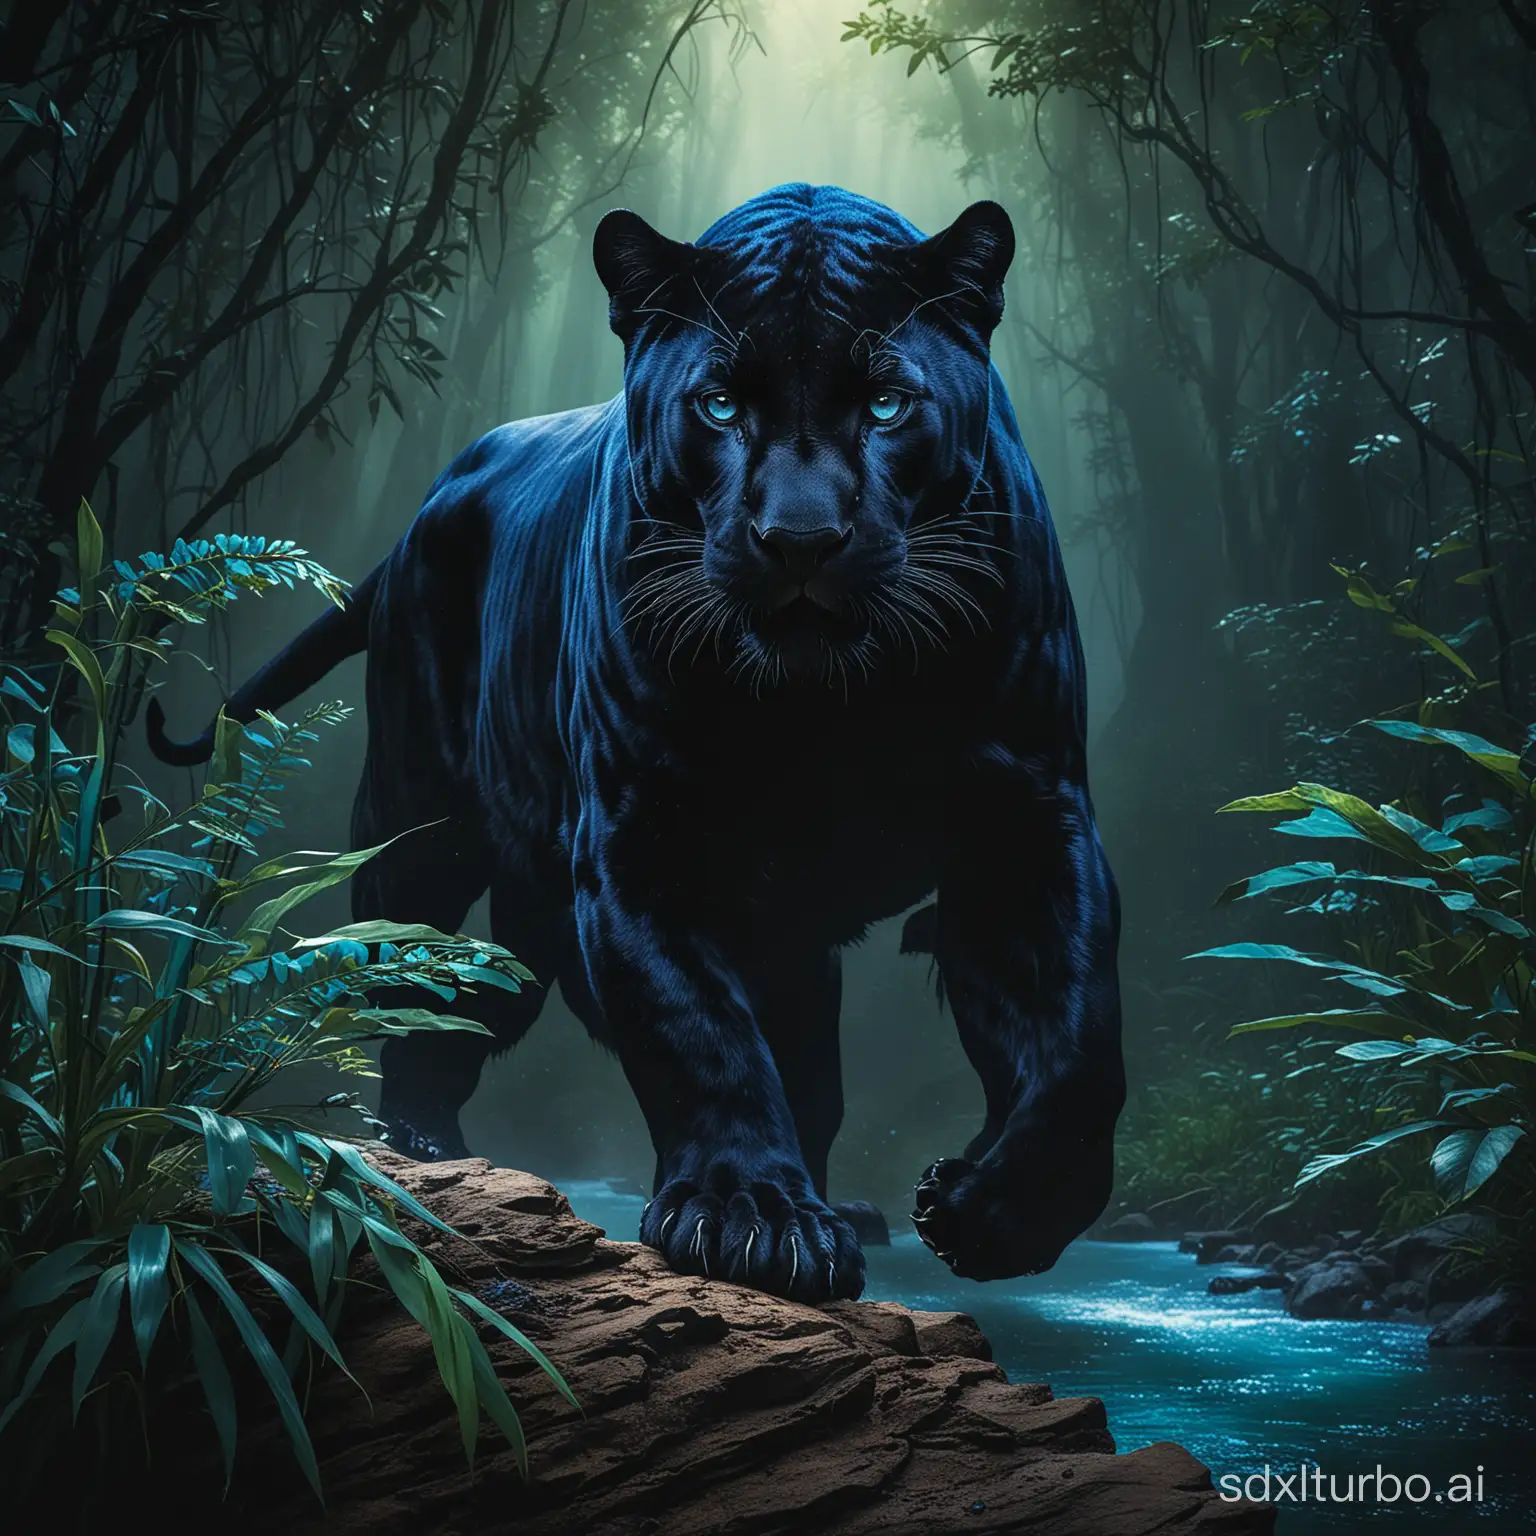 beautiful wildlife magazine cover photo, black panther, dynamic composition and dramatic lighting, cobalt blue, turquoise